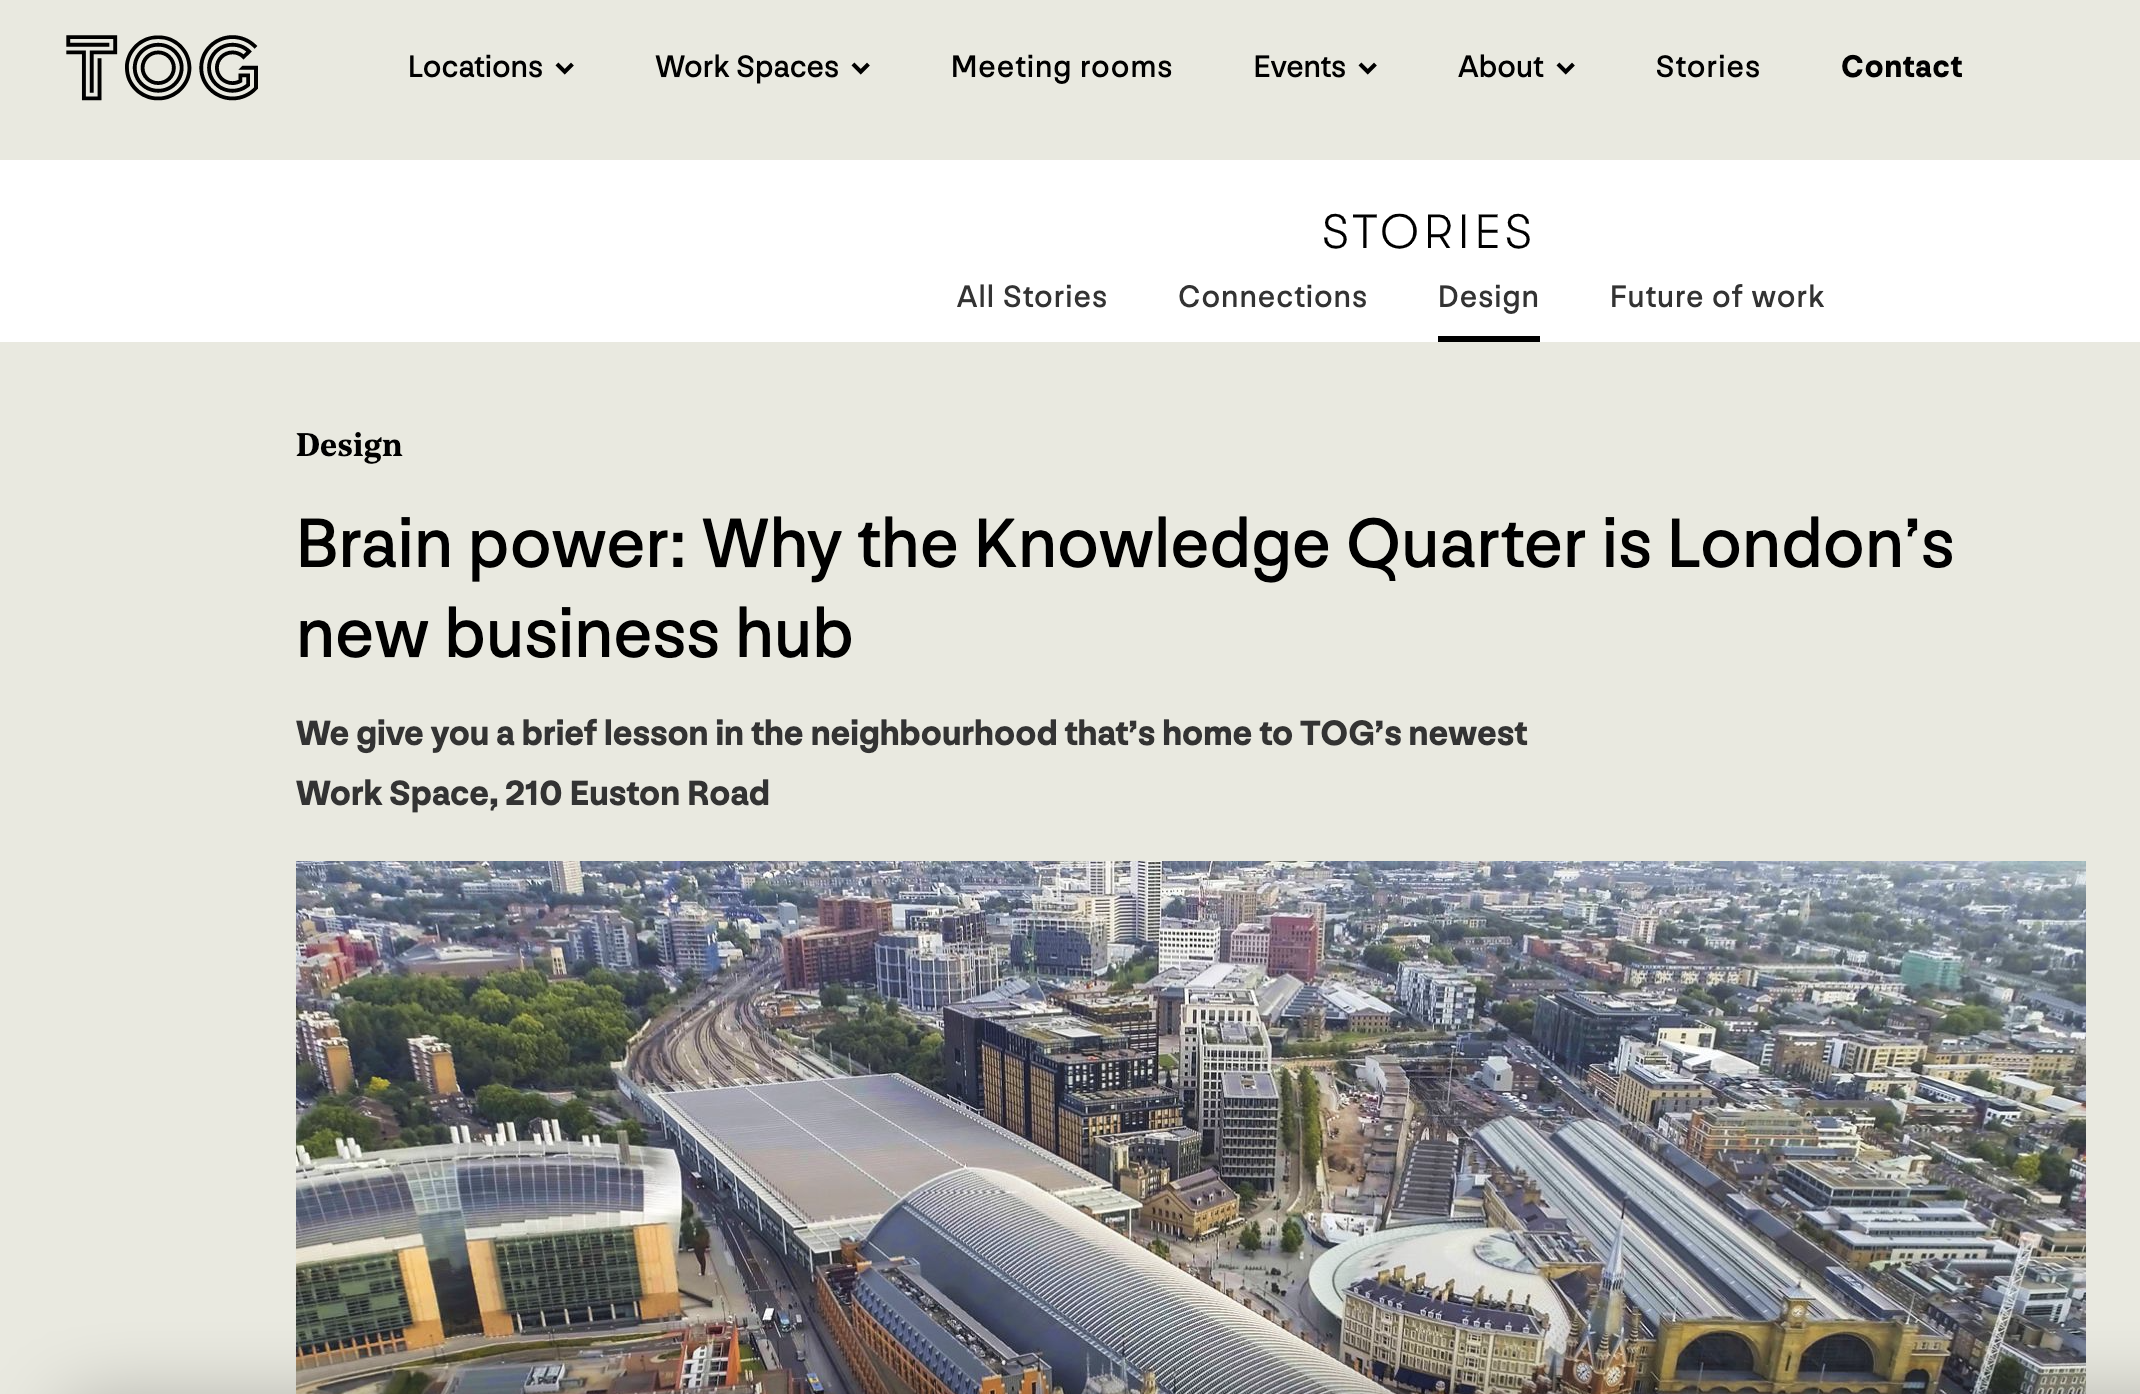 TOG - Why the Knowledge Quarter is London's new business hub